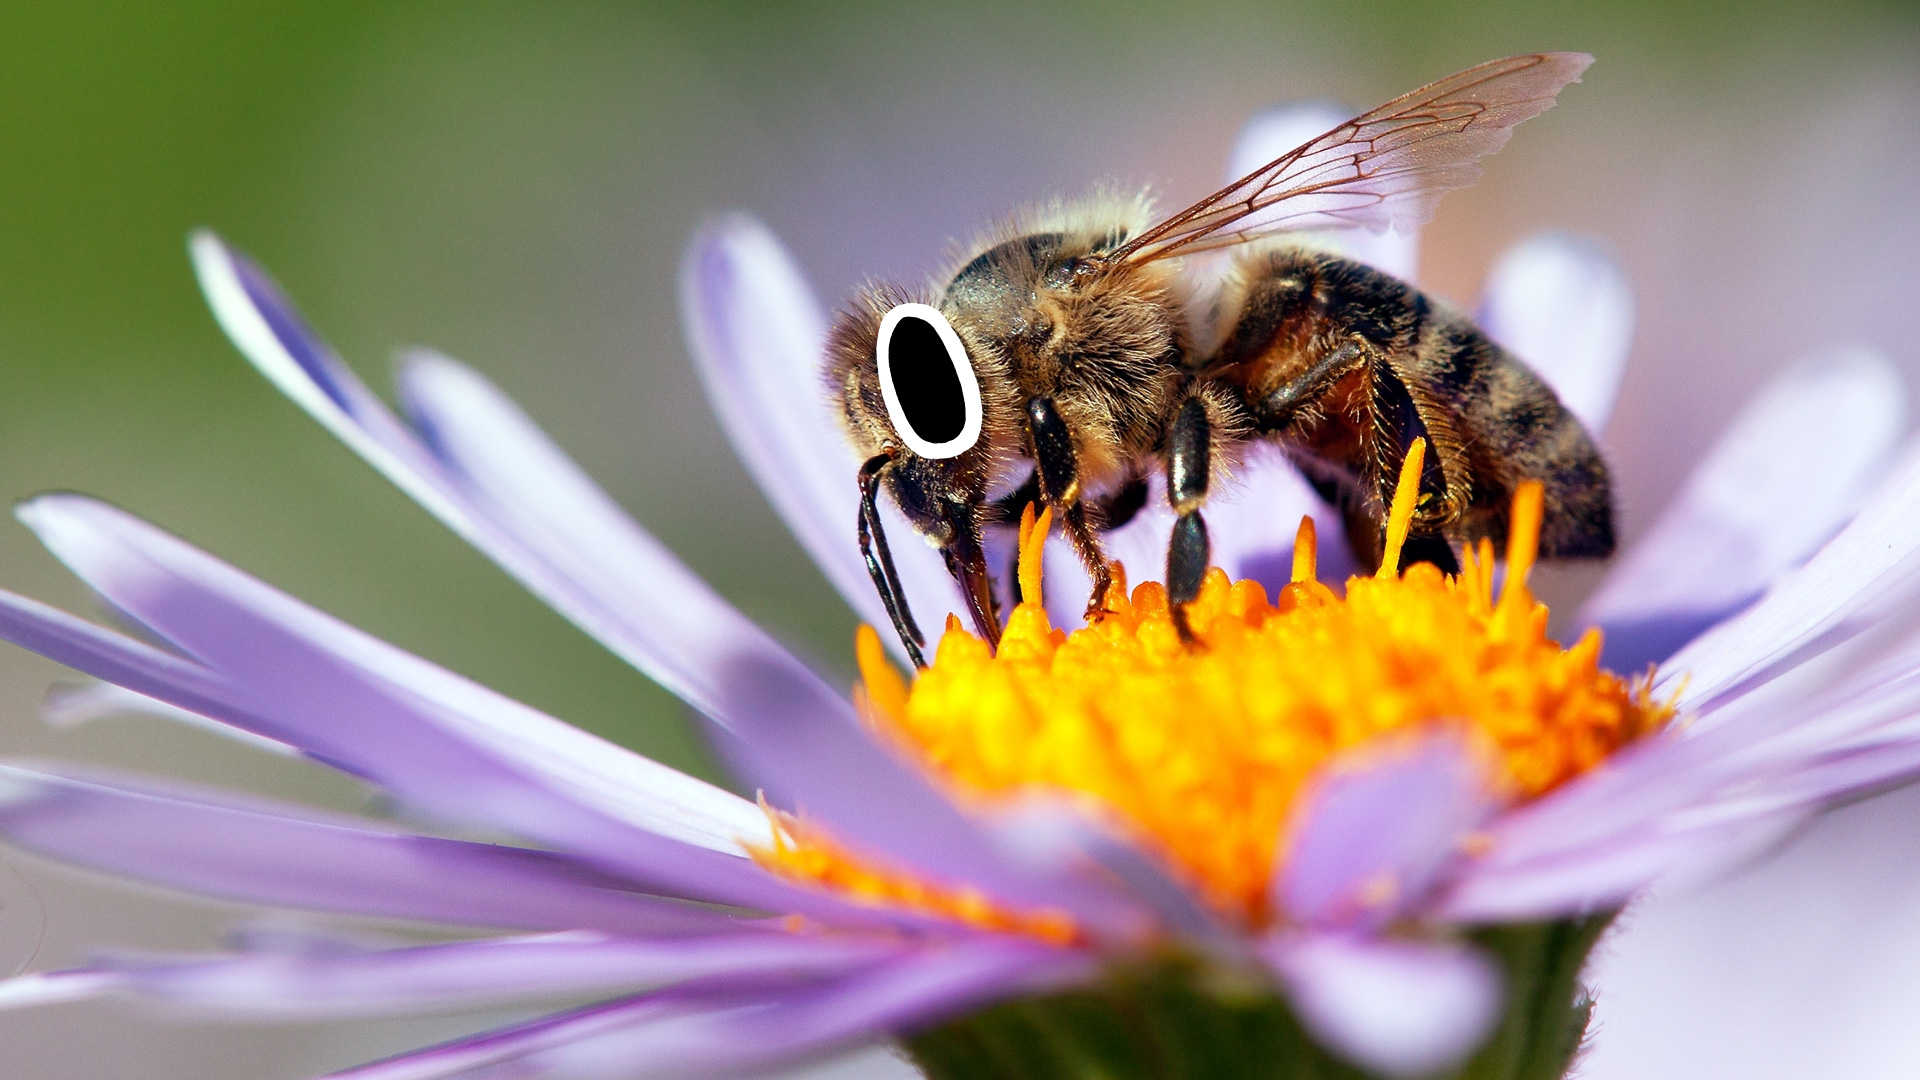 A honey bee sitting on a violet flower